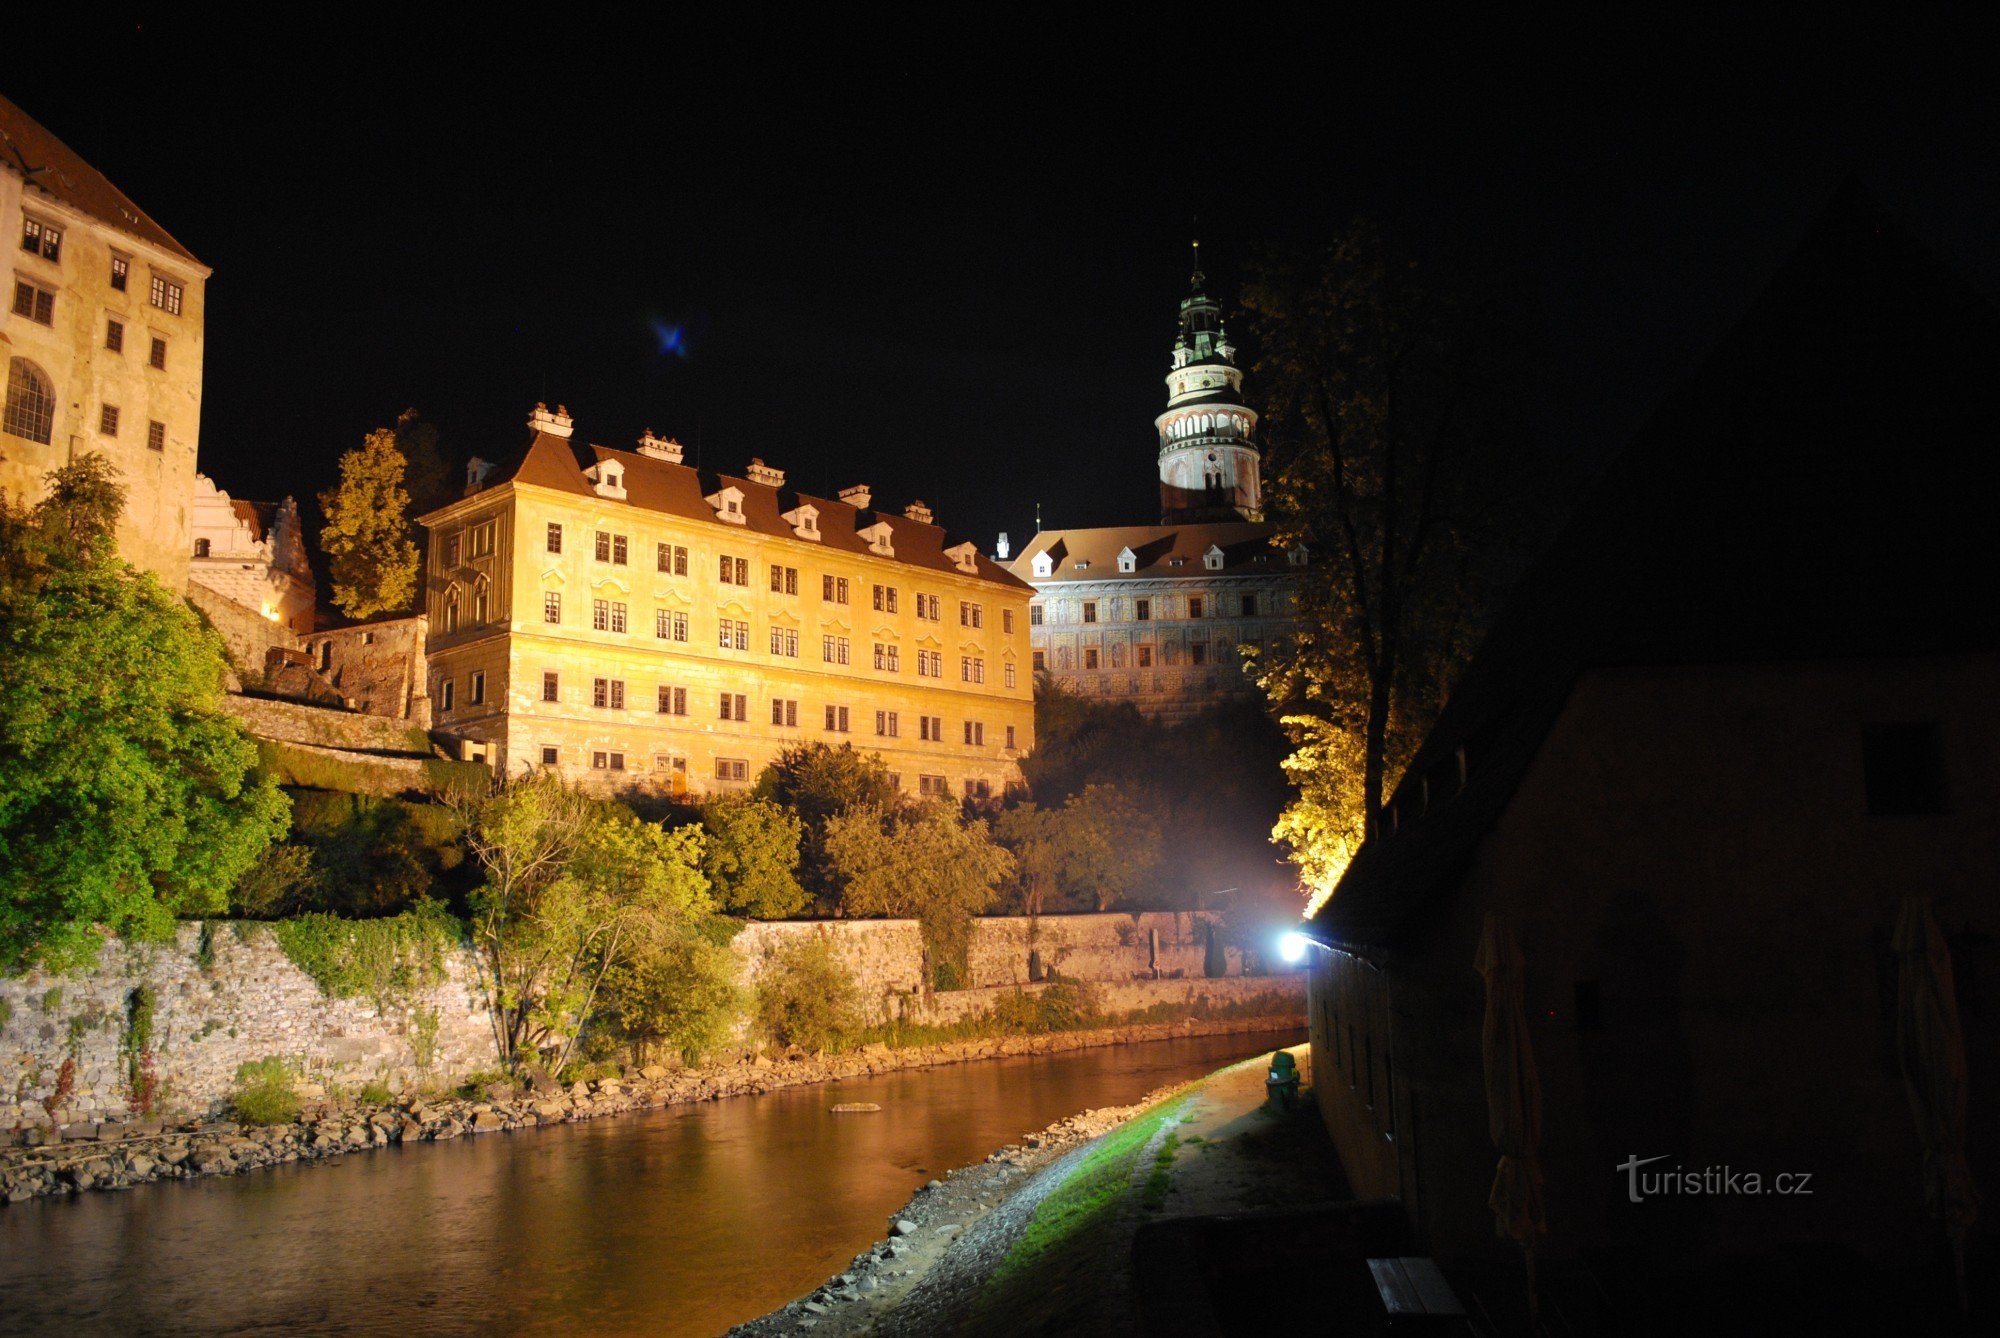 Český Krumlov inside the walls is beautiful and romantic in the evening - BEAUTIFUL